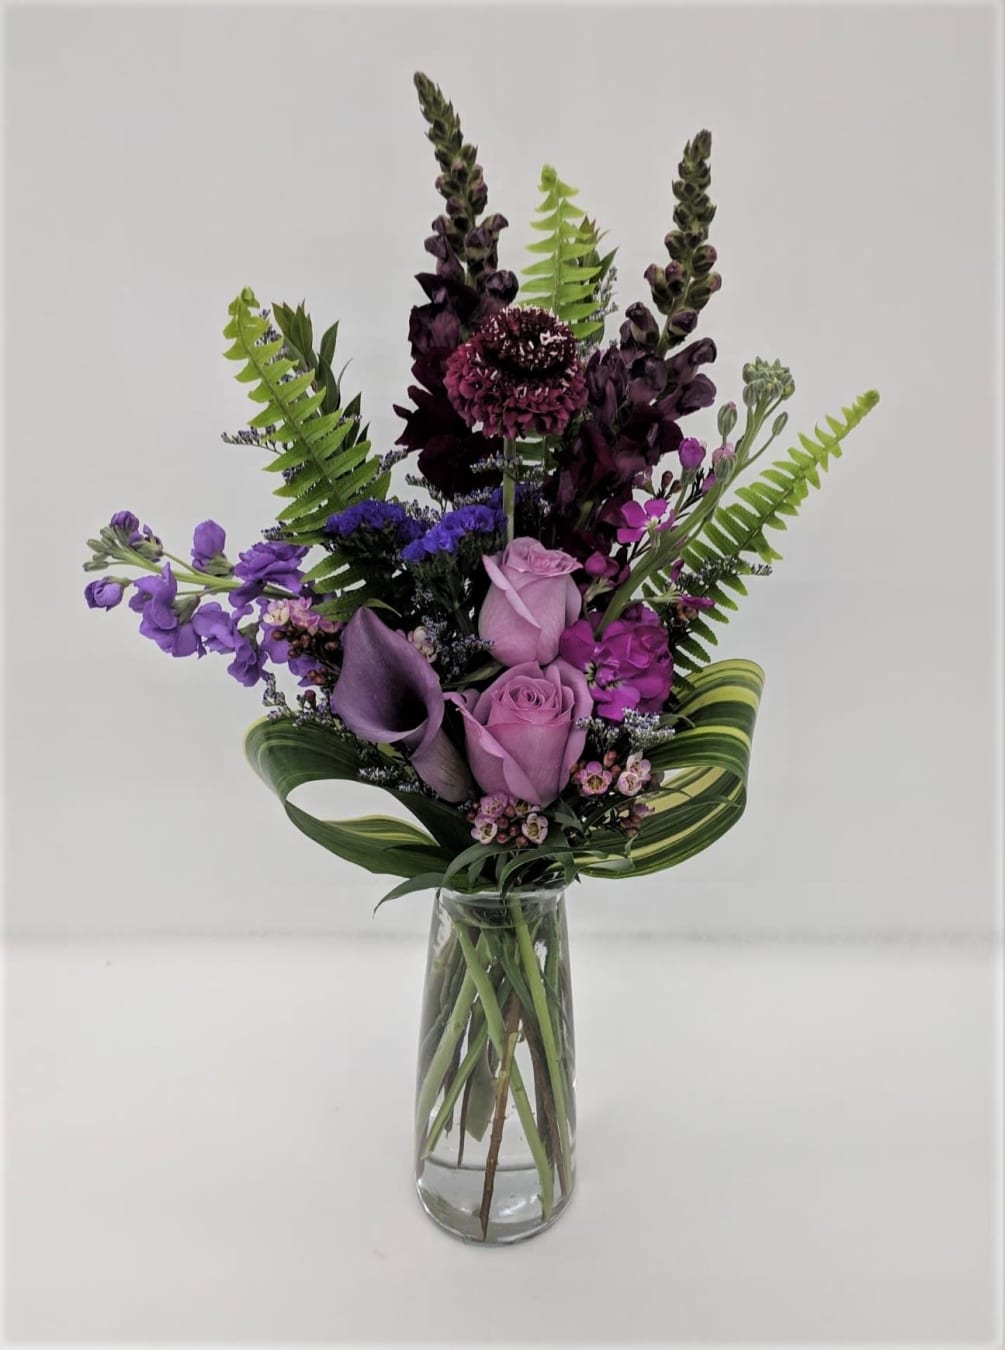 All shades of purple in this simple and elegant arrangement for the